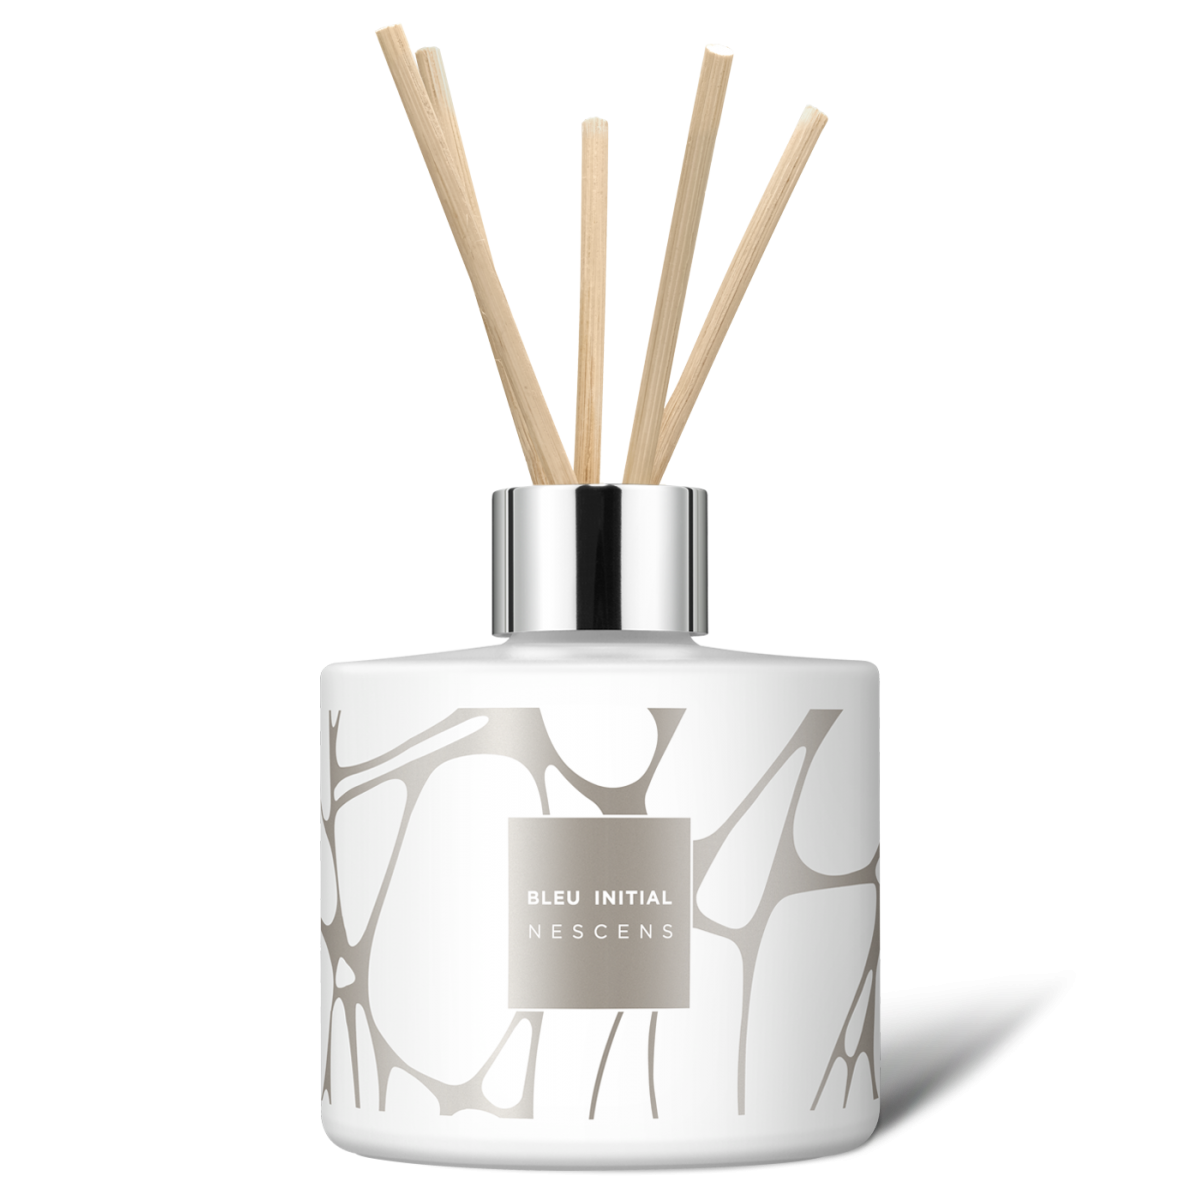 Bleu Initial, fragrance diffuser, has a floral perfume composed of fresh and light scents of hesperidia and jasmine - NS126